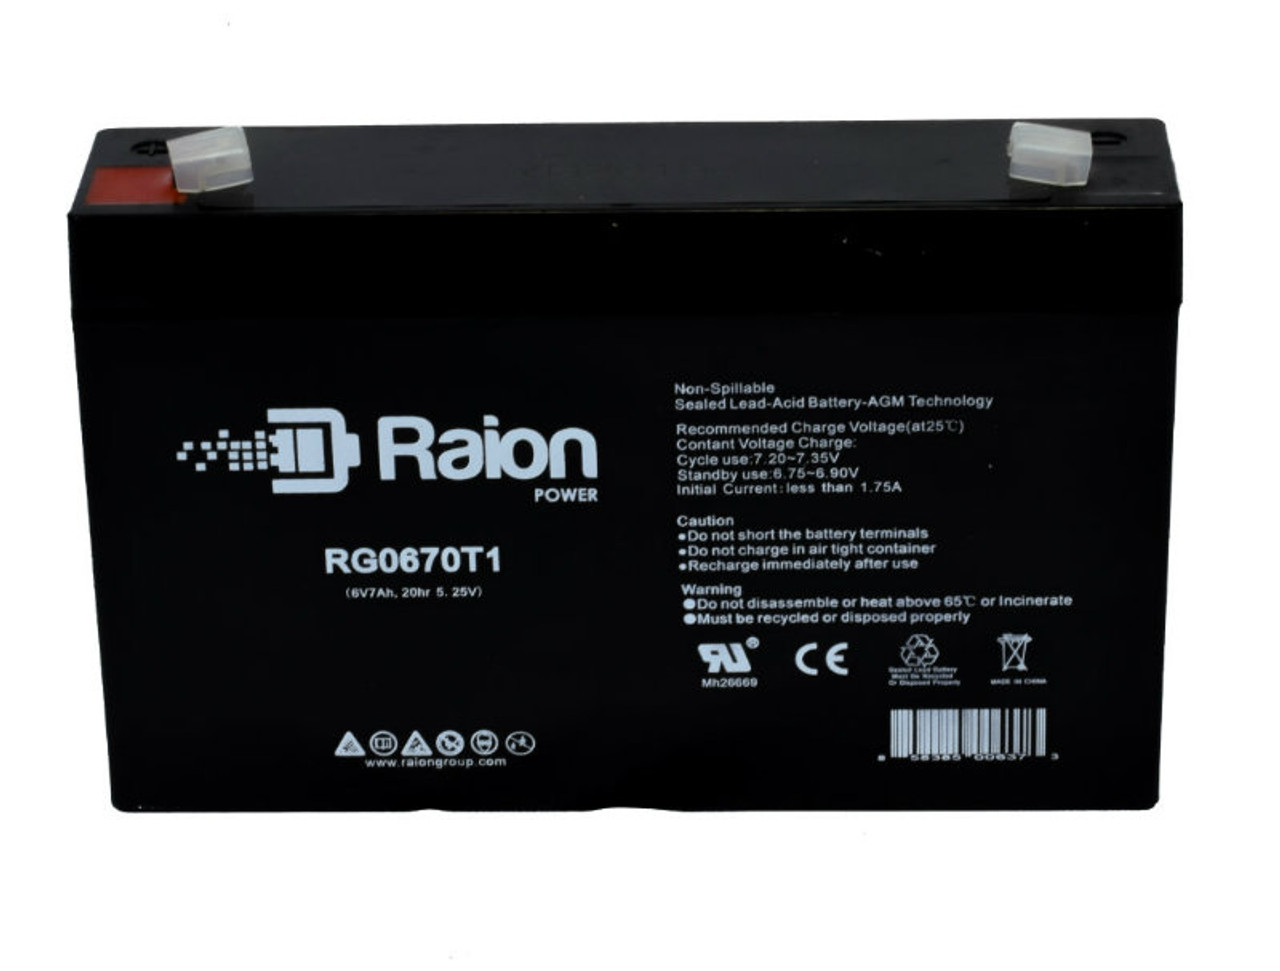 Raion Power RG0670T1 Replacement Battery Cartridge for Aosom 370-113V80BU 6V Volkswagen Beetle Car Toy